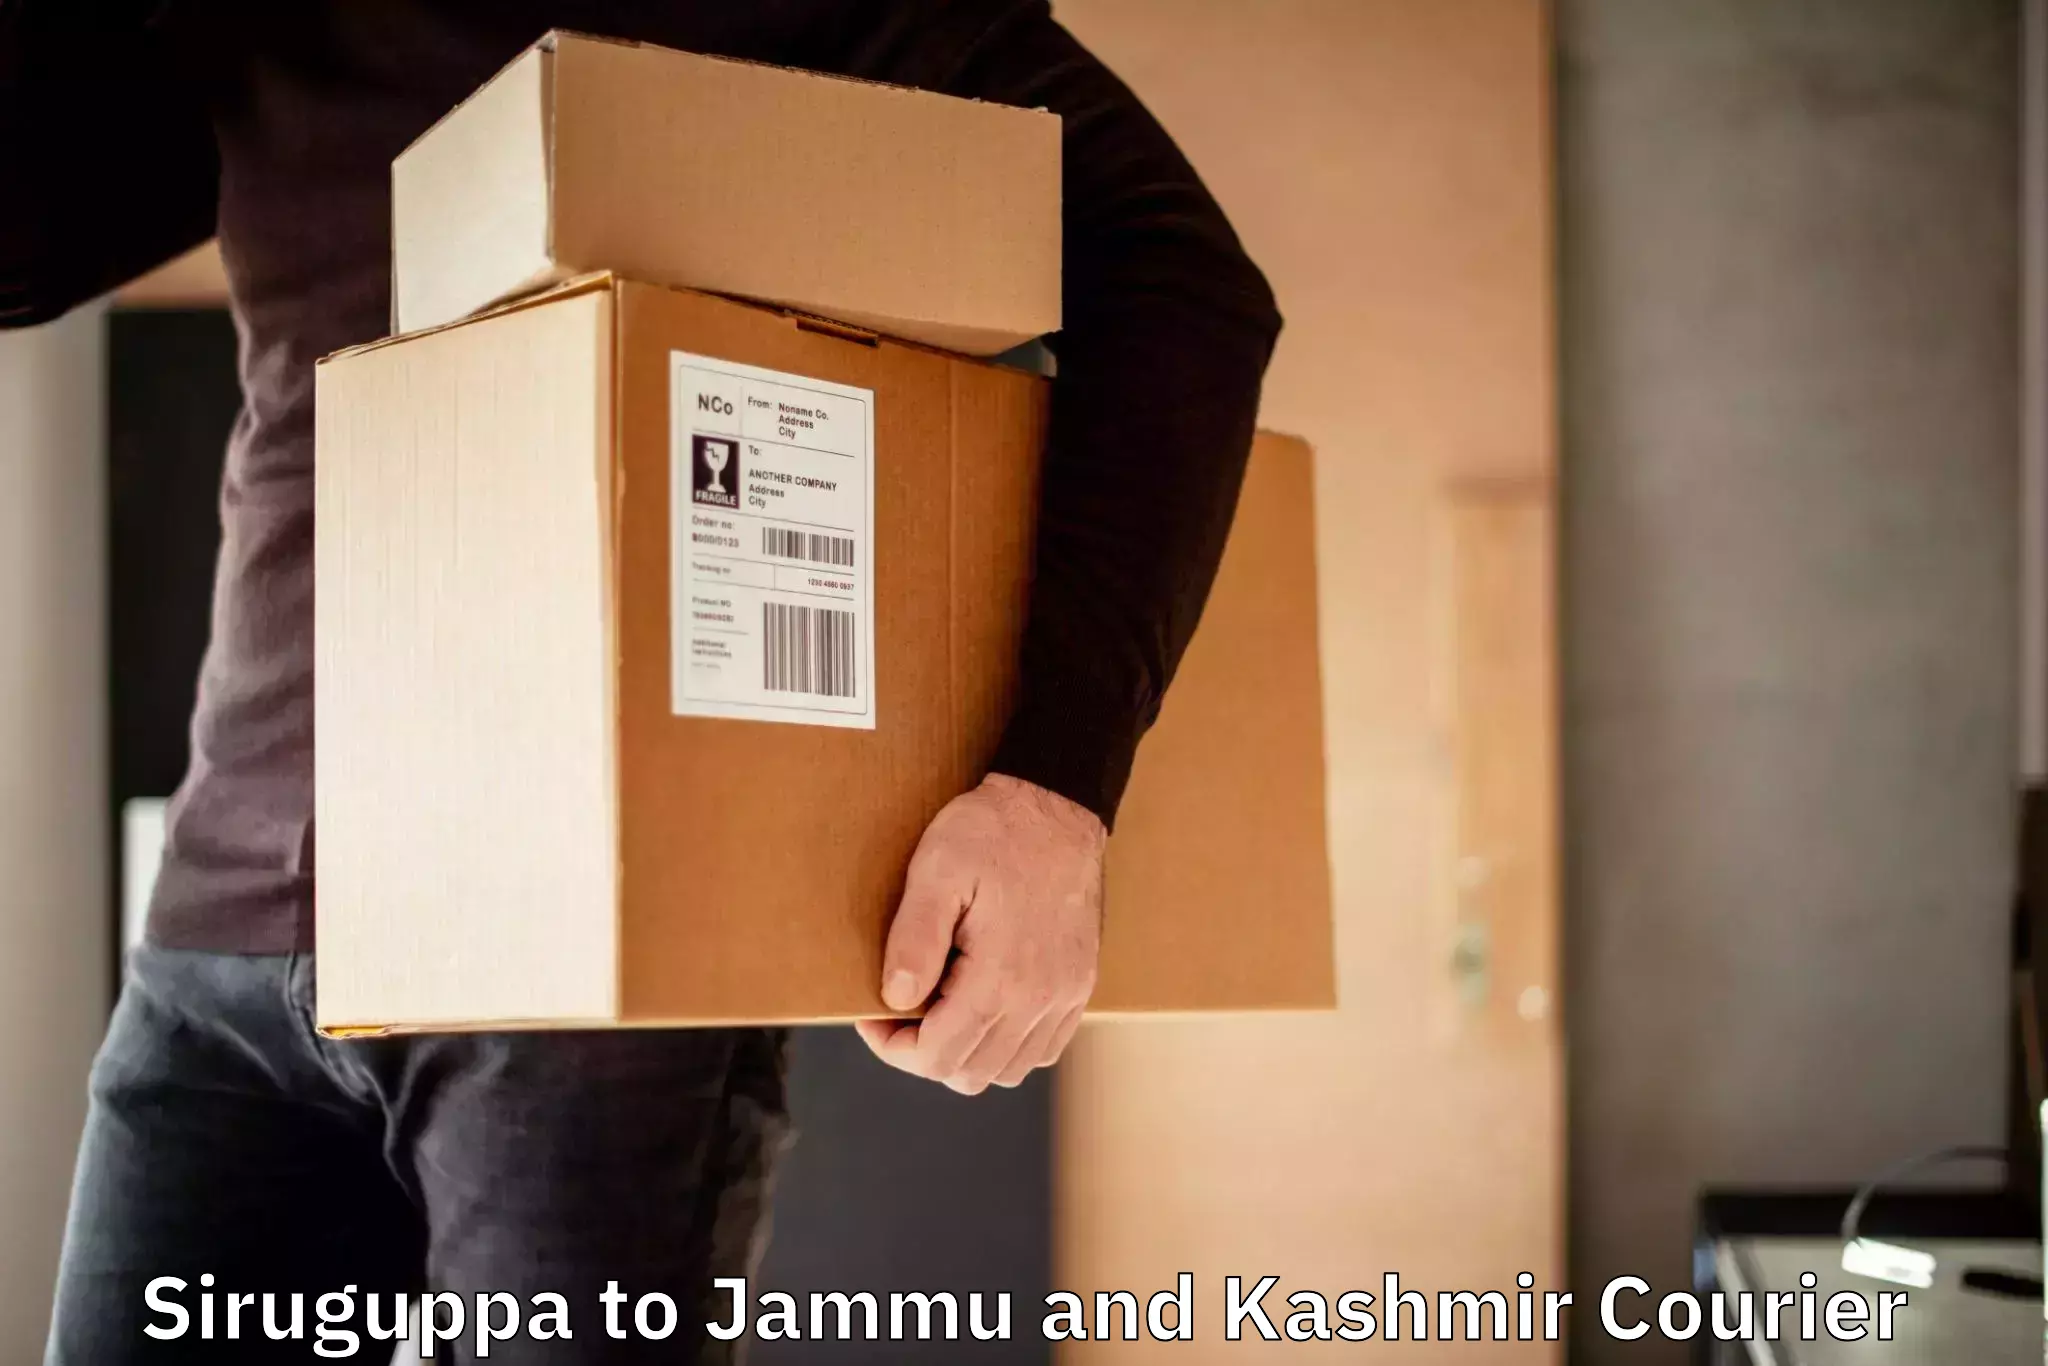 Courier service innovation Siruguppa to Udhampur